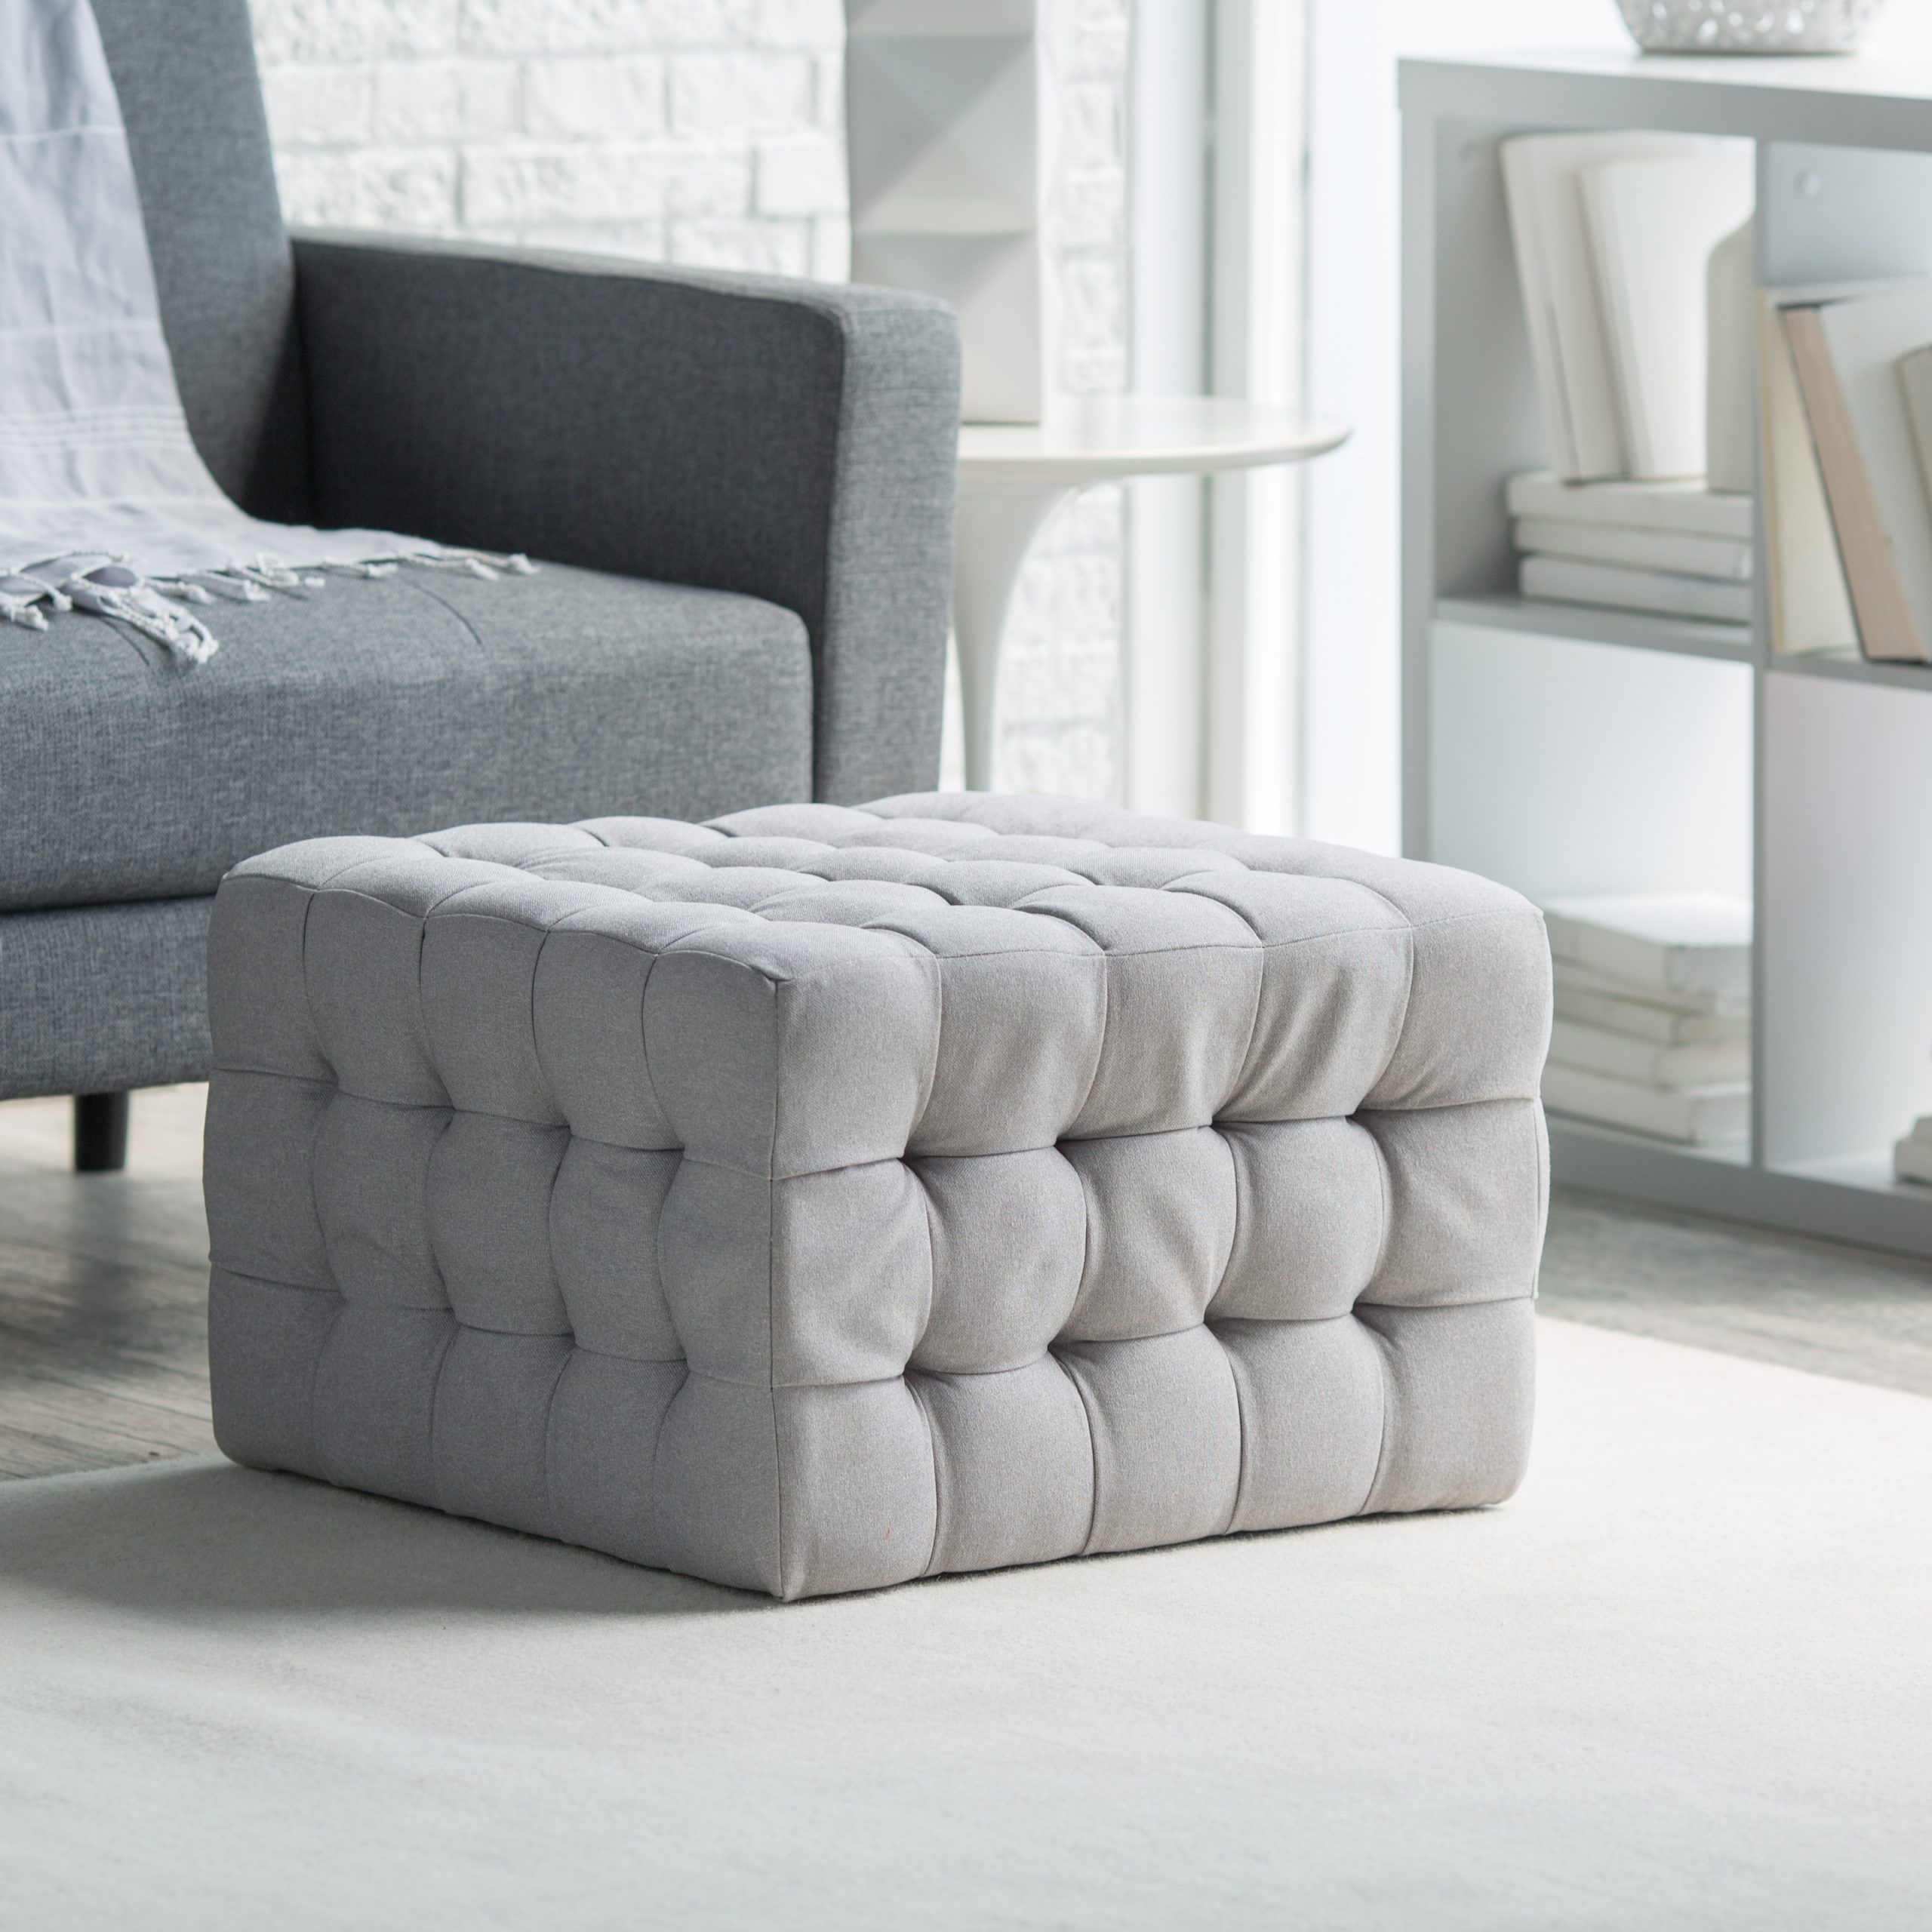 Belham Living Allover Tufted Square Ottoman – Grey – Ottomans At Hayneedle With Natural Fabric Square Ottomans (View 3 of 20)